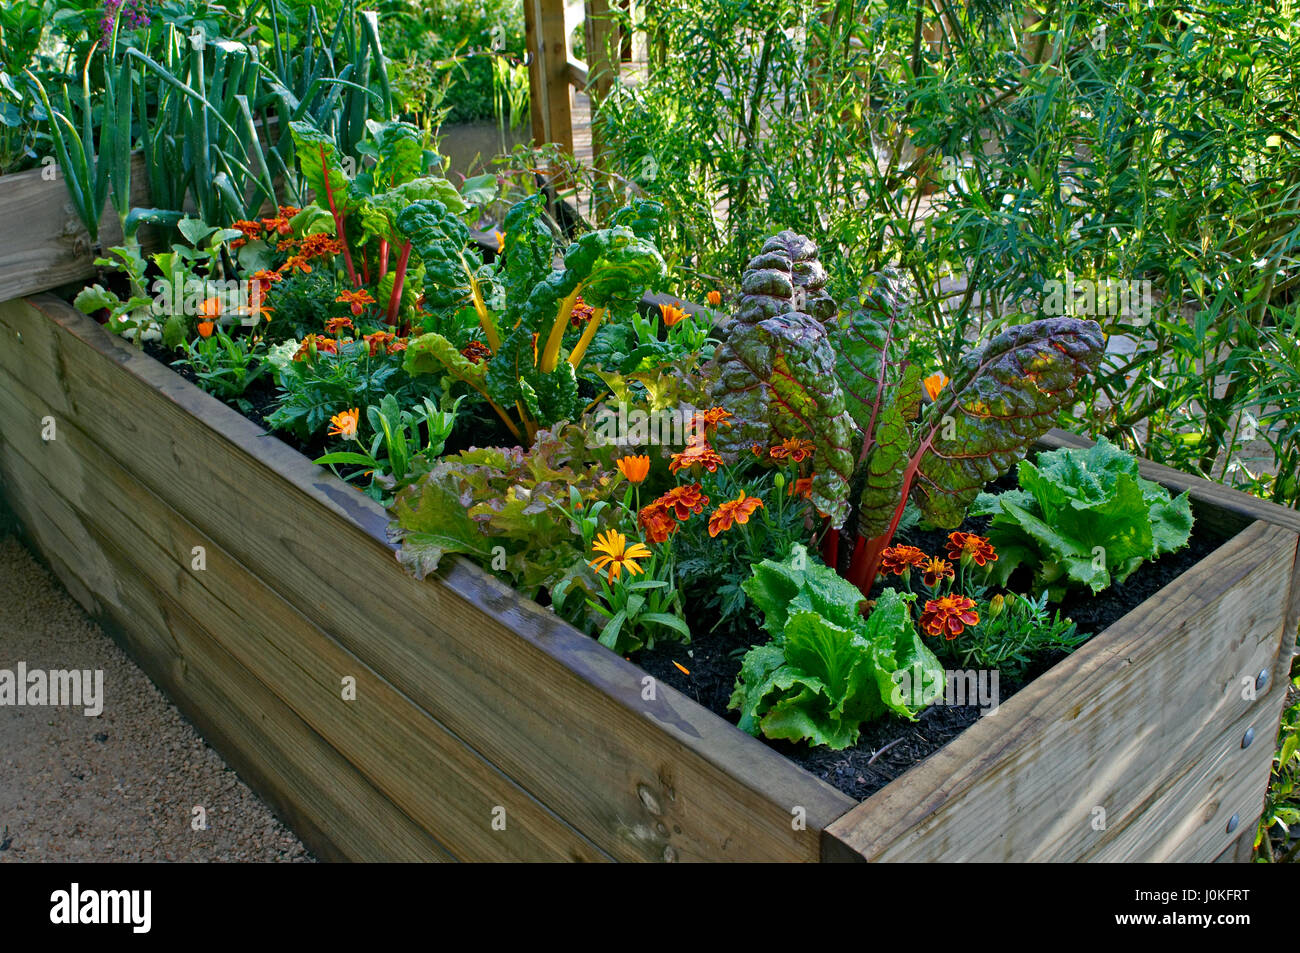 A raised bed of vegetables and flowers in a urban garden Stock Photo ...